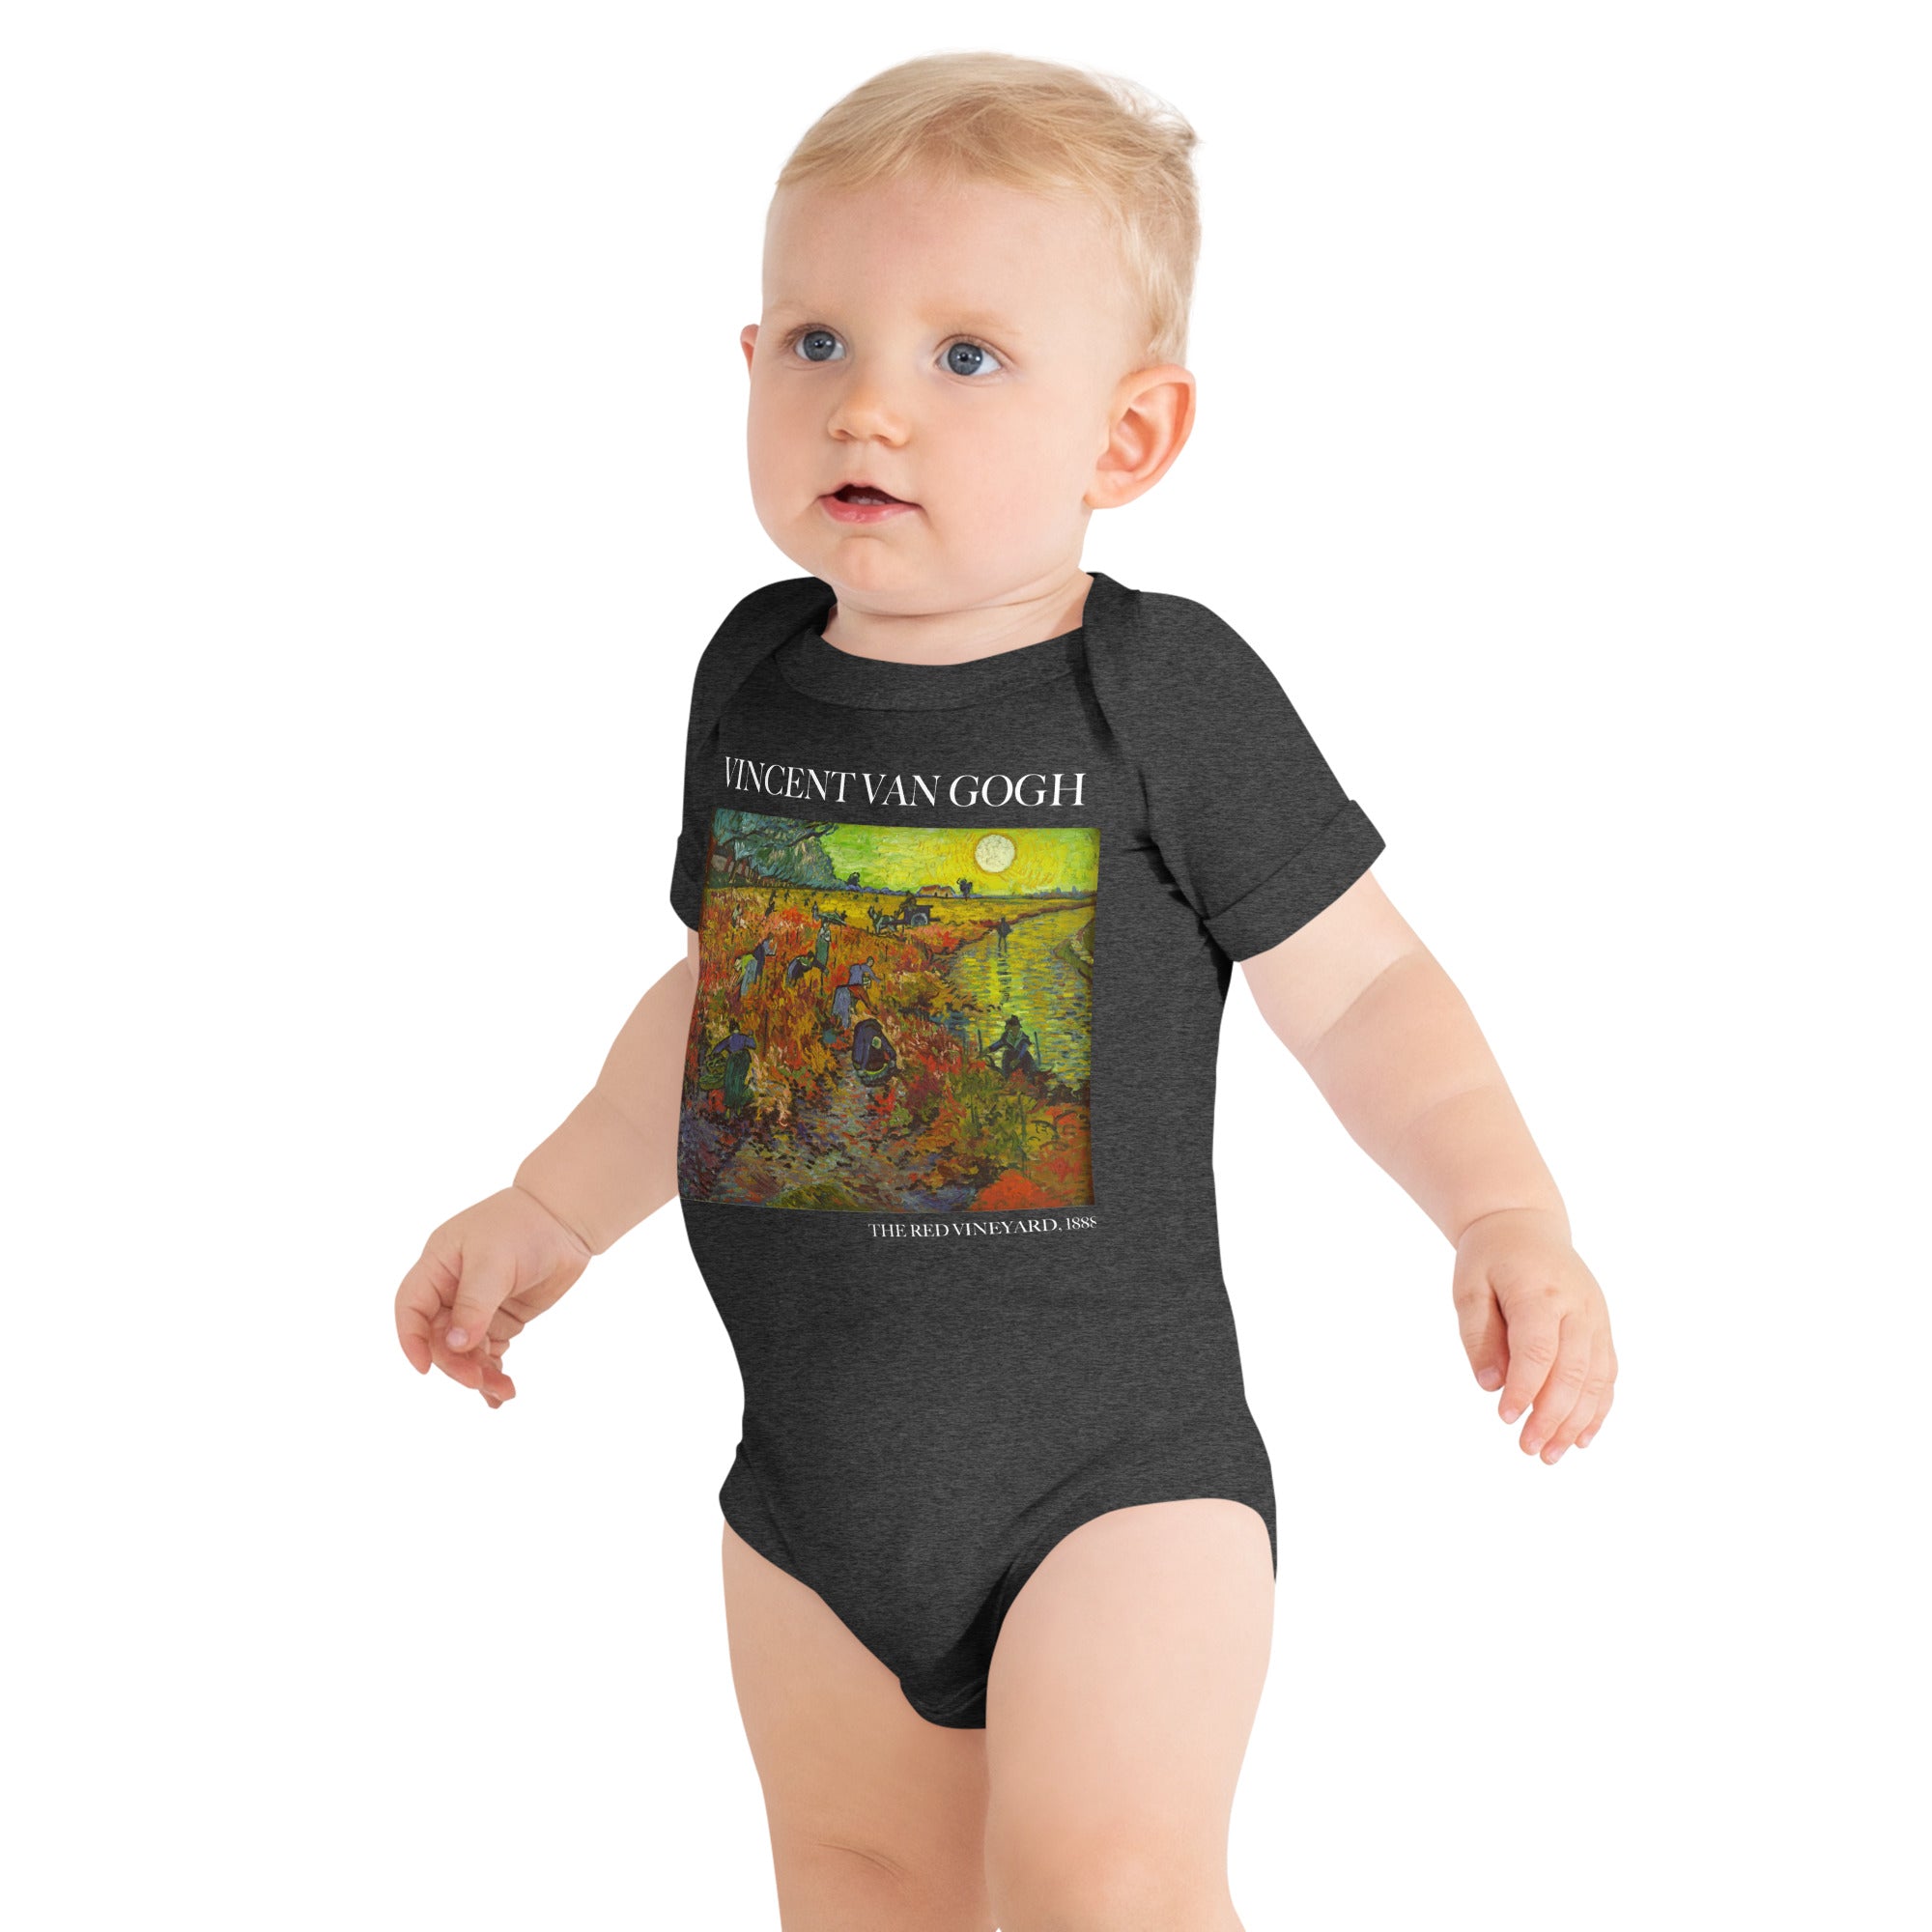 Vincent van Gogh 'The Red Vineyard' Famous Painting Short Sleeve One Piece | Premium Baby Art One Sleeve